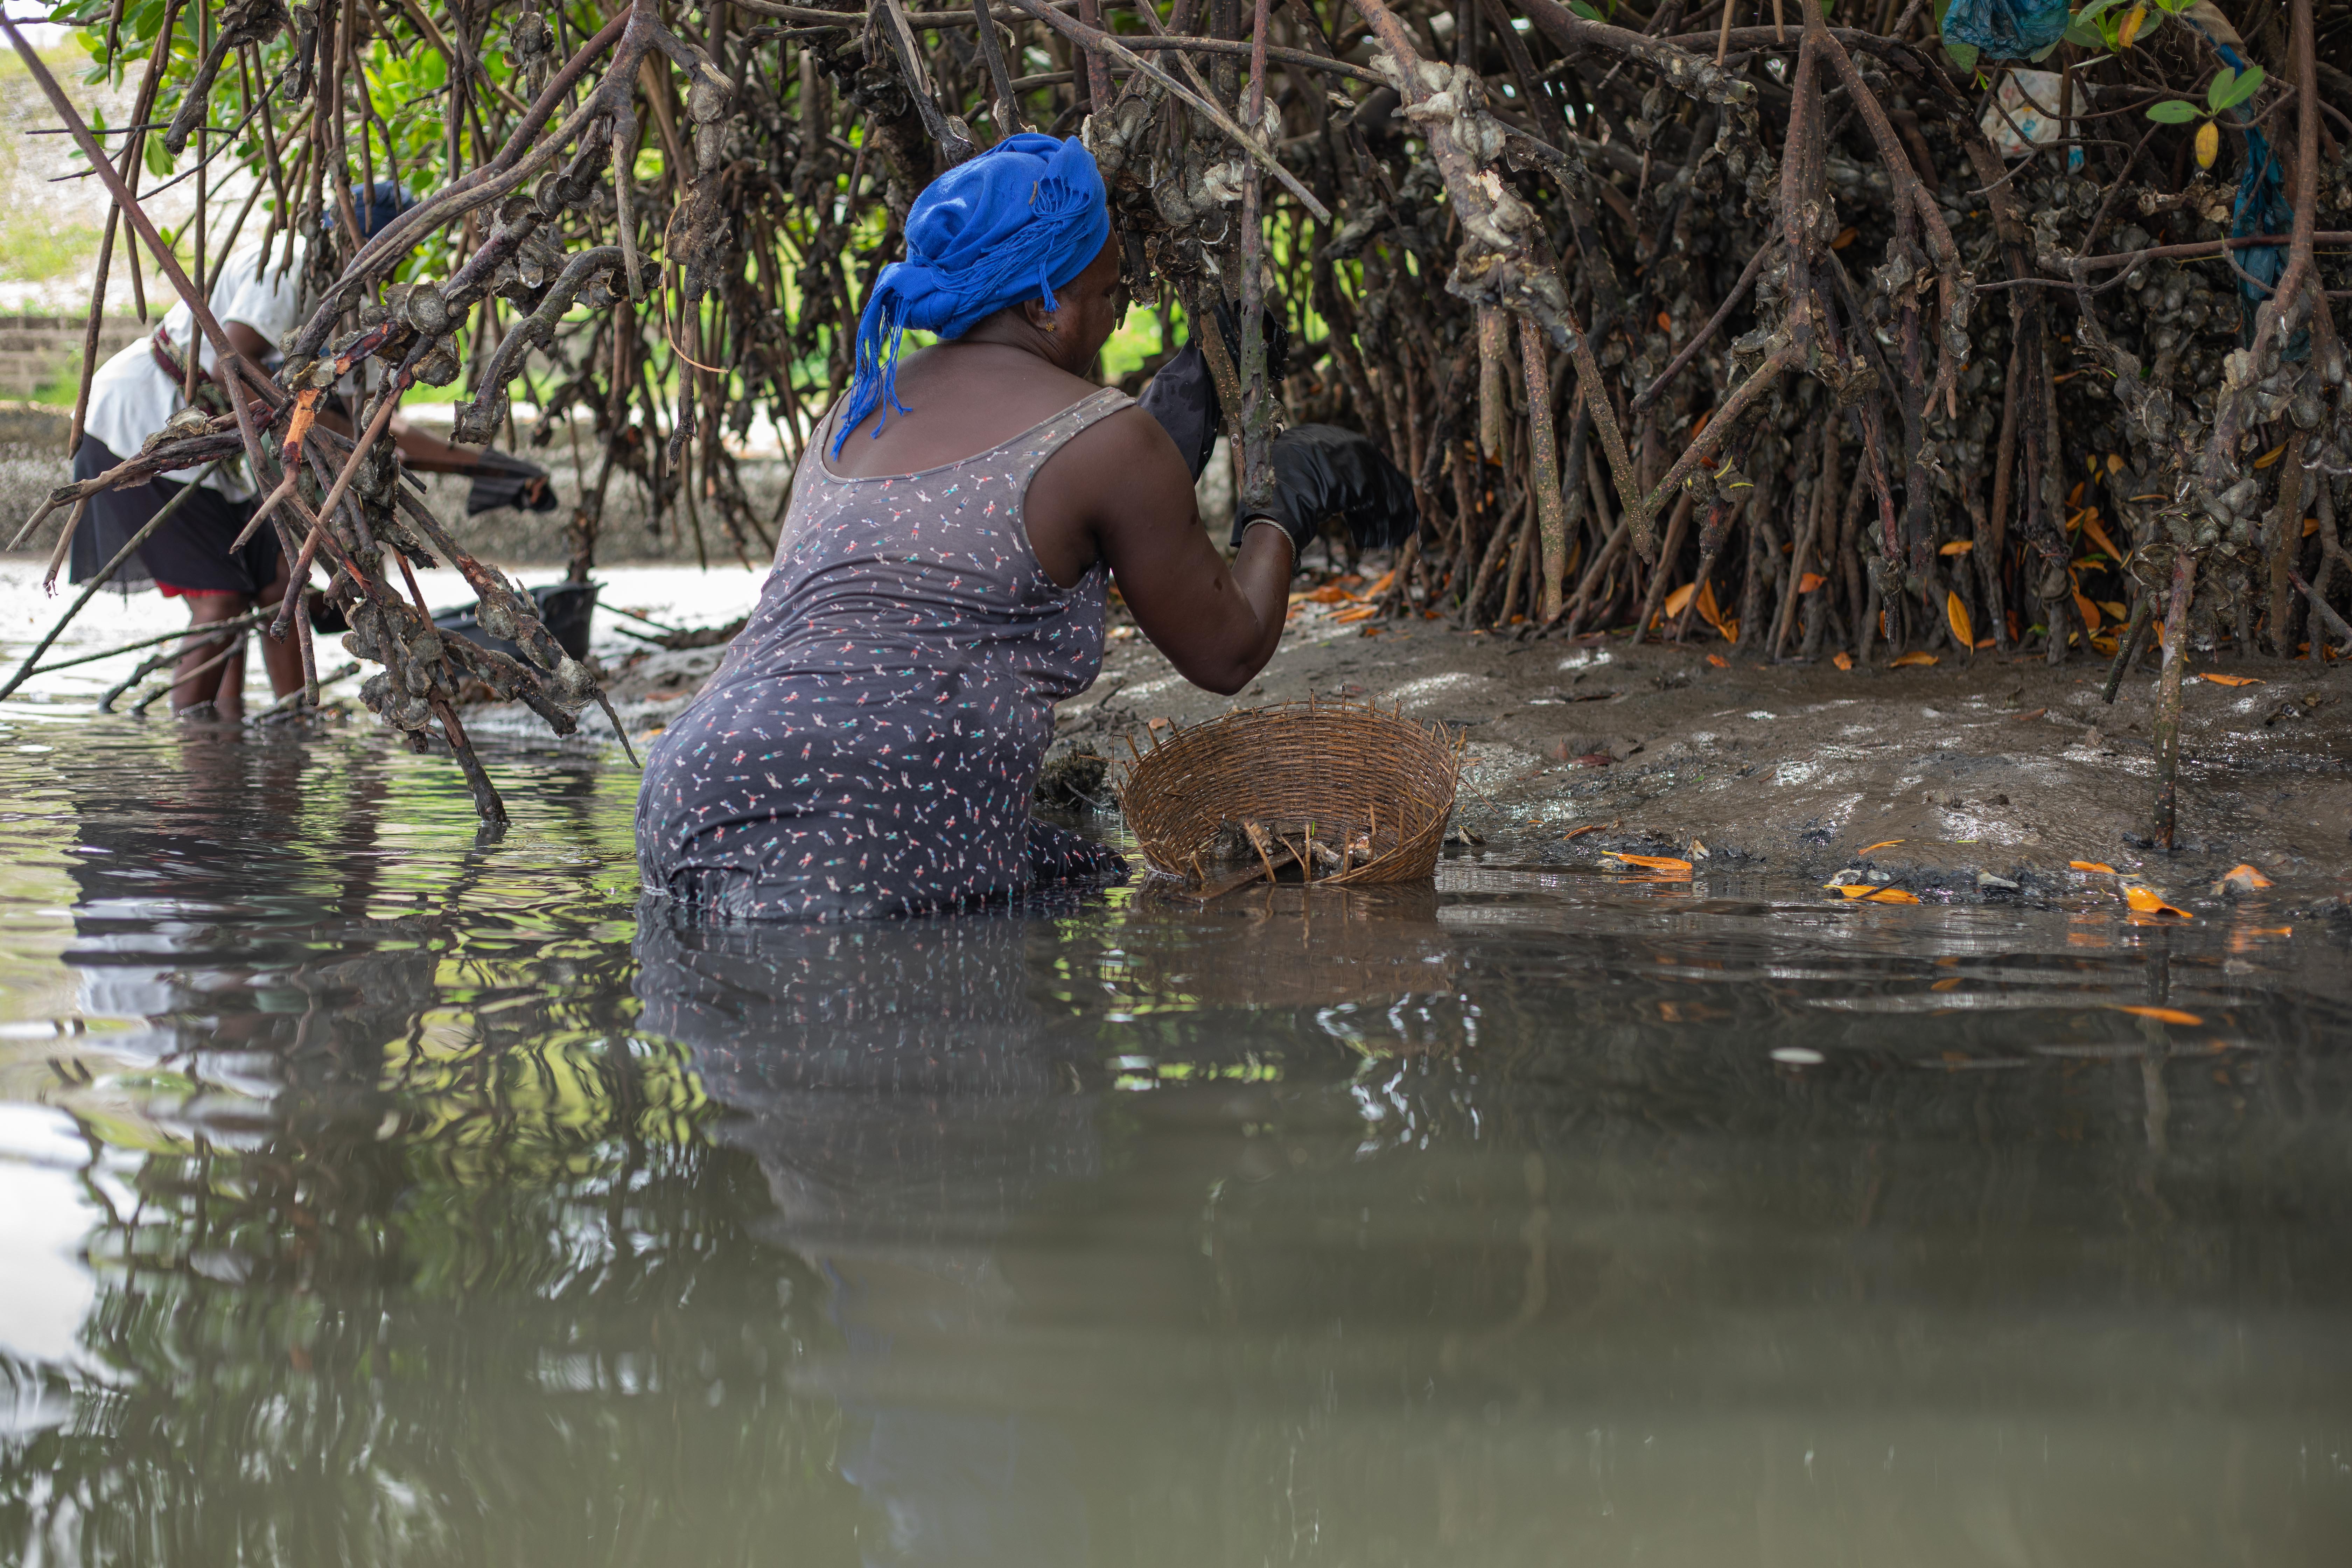 Women gather oysters from the branches of the mangroves in Joal-Fadiouth